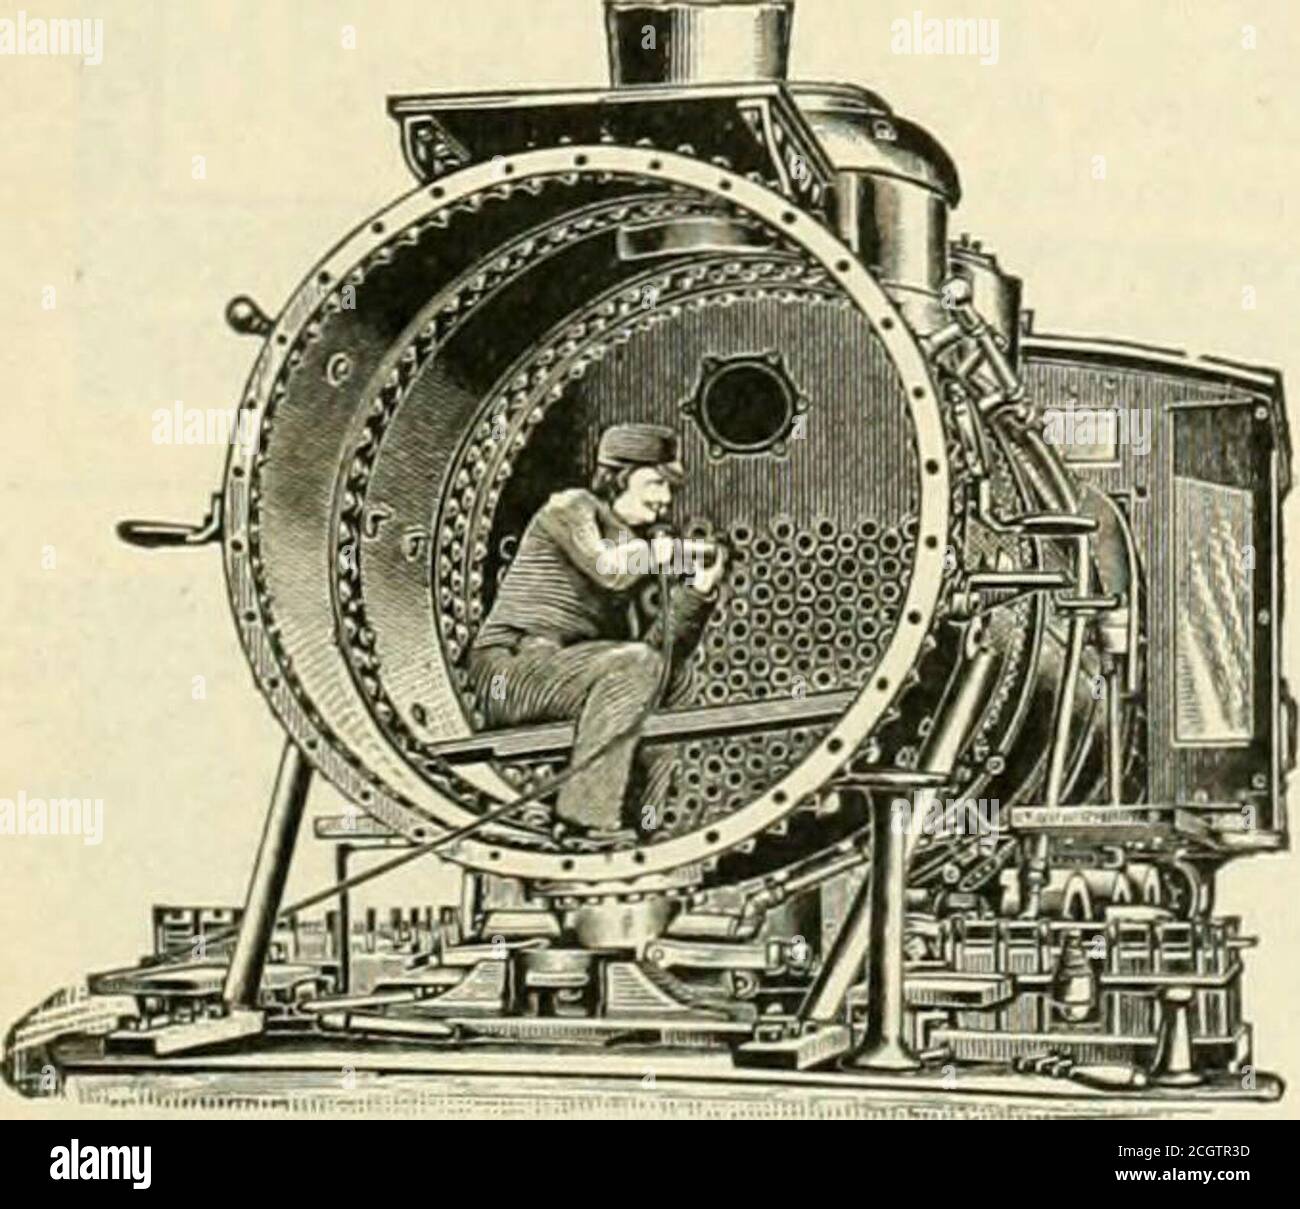 . Locomotive engineering : a practical journal of railway motive power and rolling stock . .LEABLE Iron Castings. iSoie Mafl&lt;ifacturer$Of THfJANNEY COUPLER FOFf PA5SENCCR AND FREIGHT CARS, /^/7/.s/j//jy//f, V^/. J. Pneumatic Tools. GREAT LABOR-SAVINGDEVICE FOR CALKING BOILERS, BEADING FLUES, HEADING RIVETS, CHIPPING CASTINGS, CUTTING KEY SLOTS, DRIVING NAILS AND SPIKES. ESPECIALLY ADAPTED FOR RAILROAD SHOPS. Will ^ea-d TxT^ro Z^l-uies a, IMCiu-uLte. All Hammers sent on ten days trial subject to approval, and gtiaranteed for one year against repairs. CHICAGO PNEUMATIC TOOL CO., ■ 553 Monadno Stock Photo